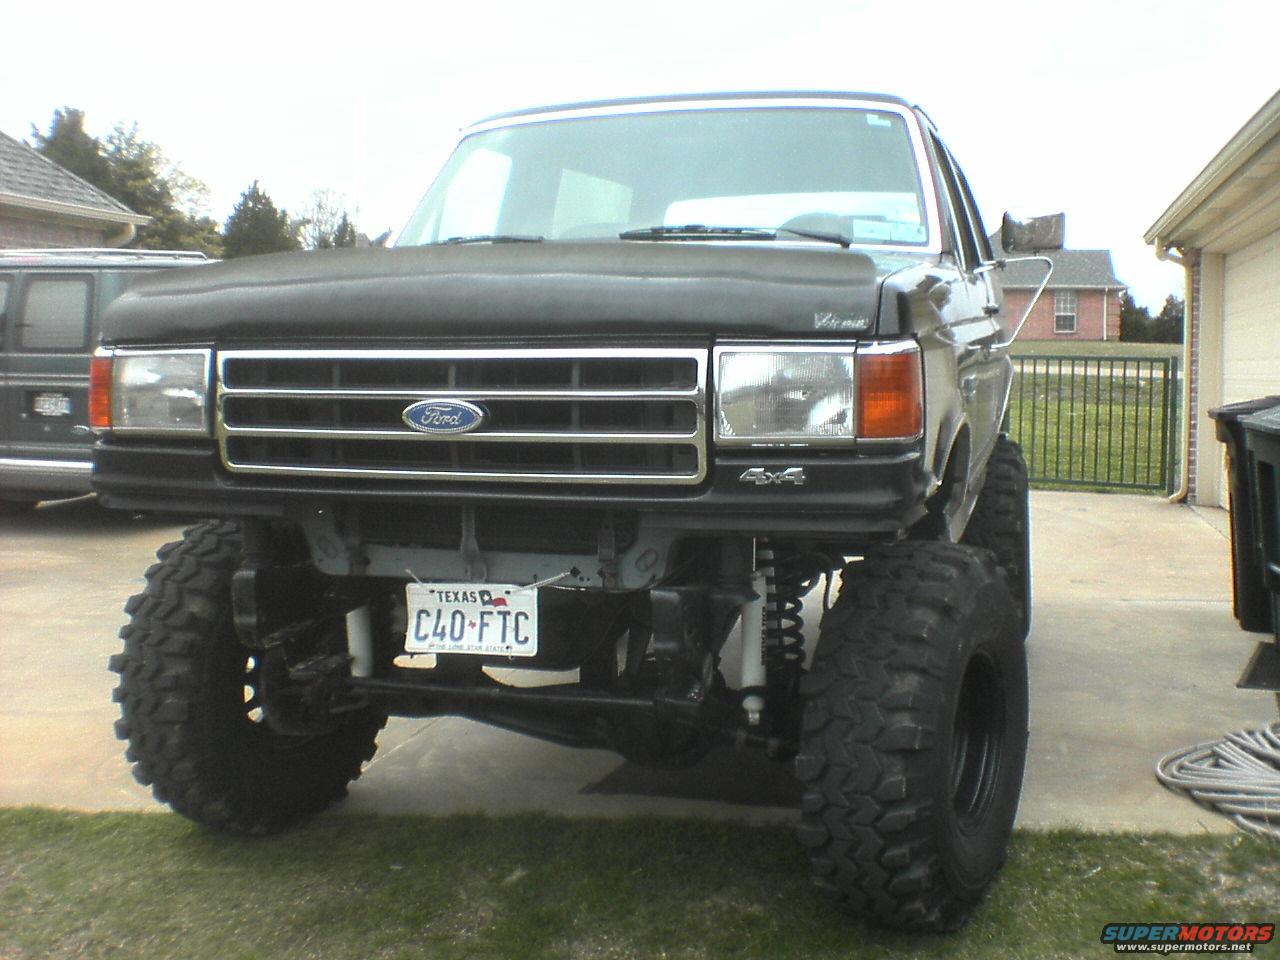 Body lifts for ford bronco #2